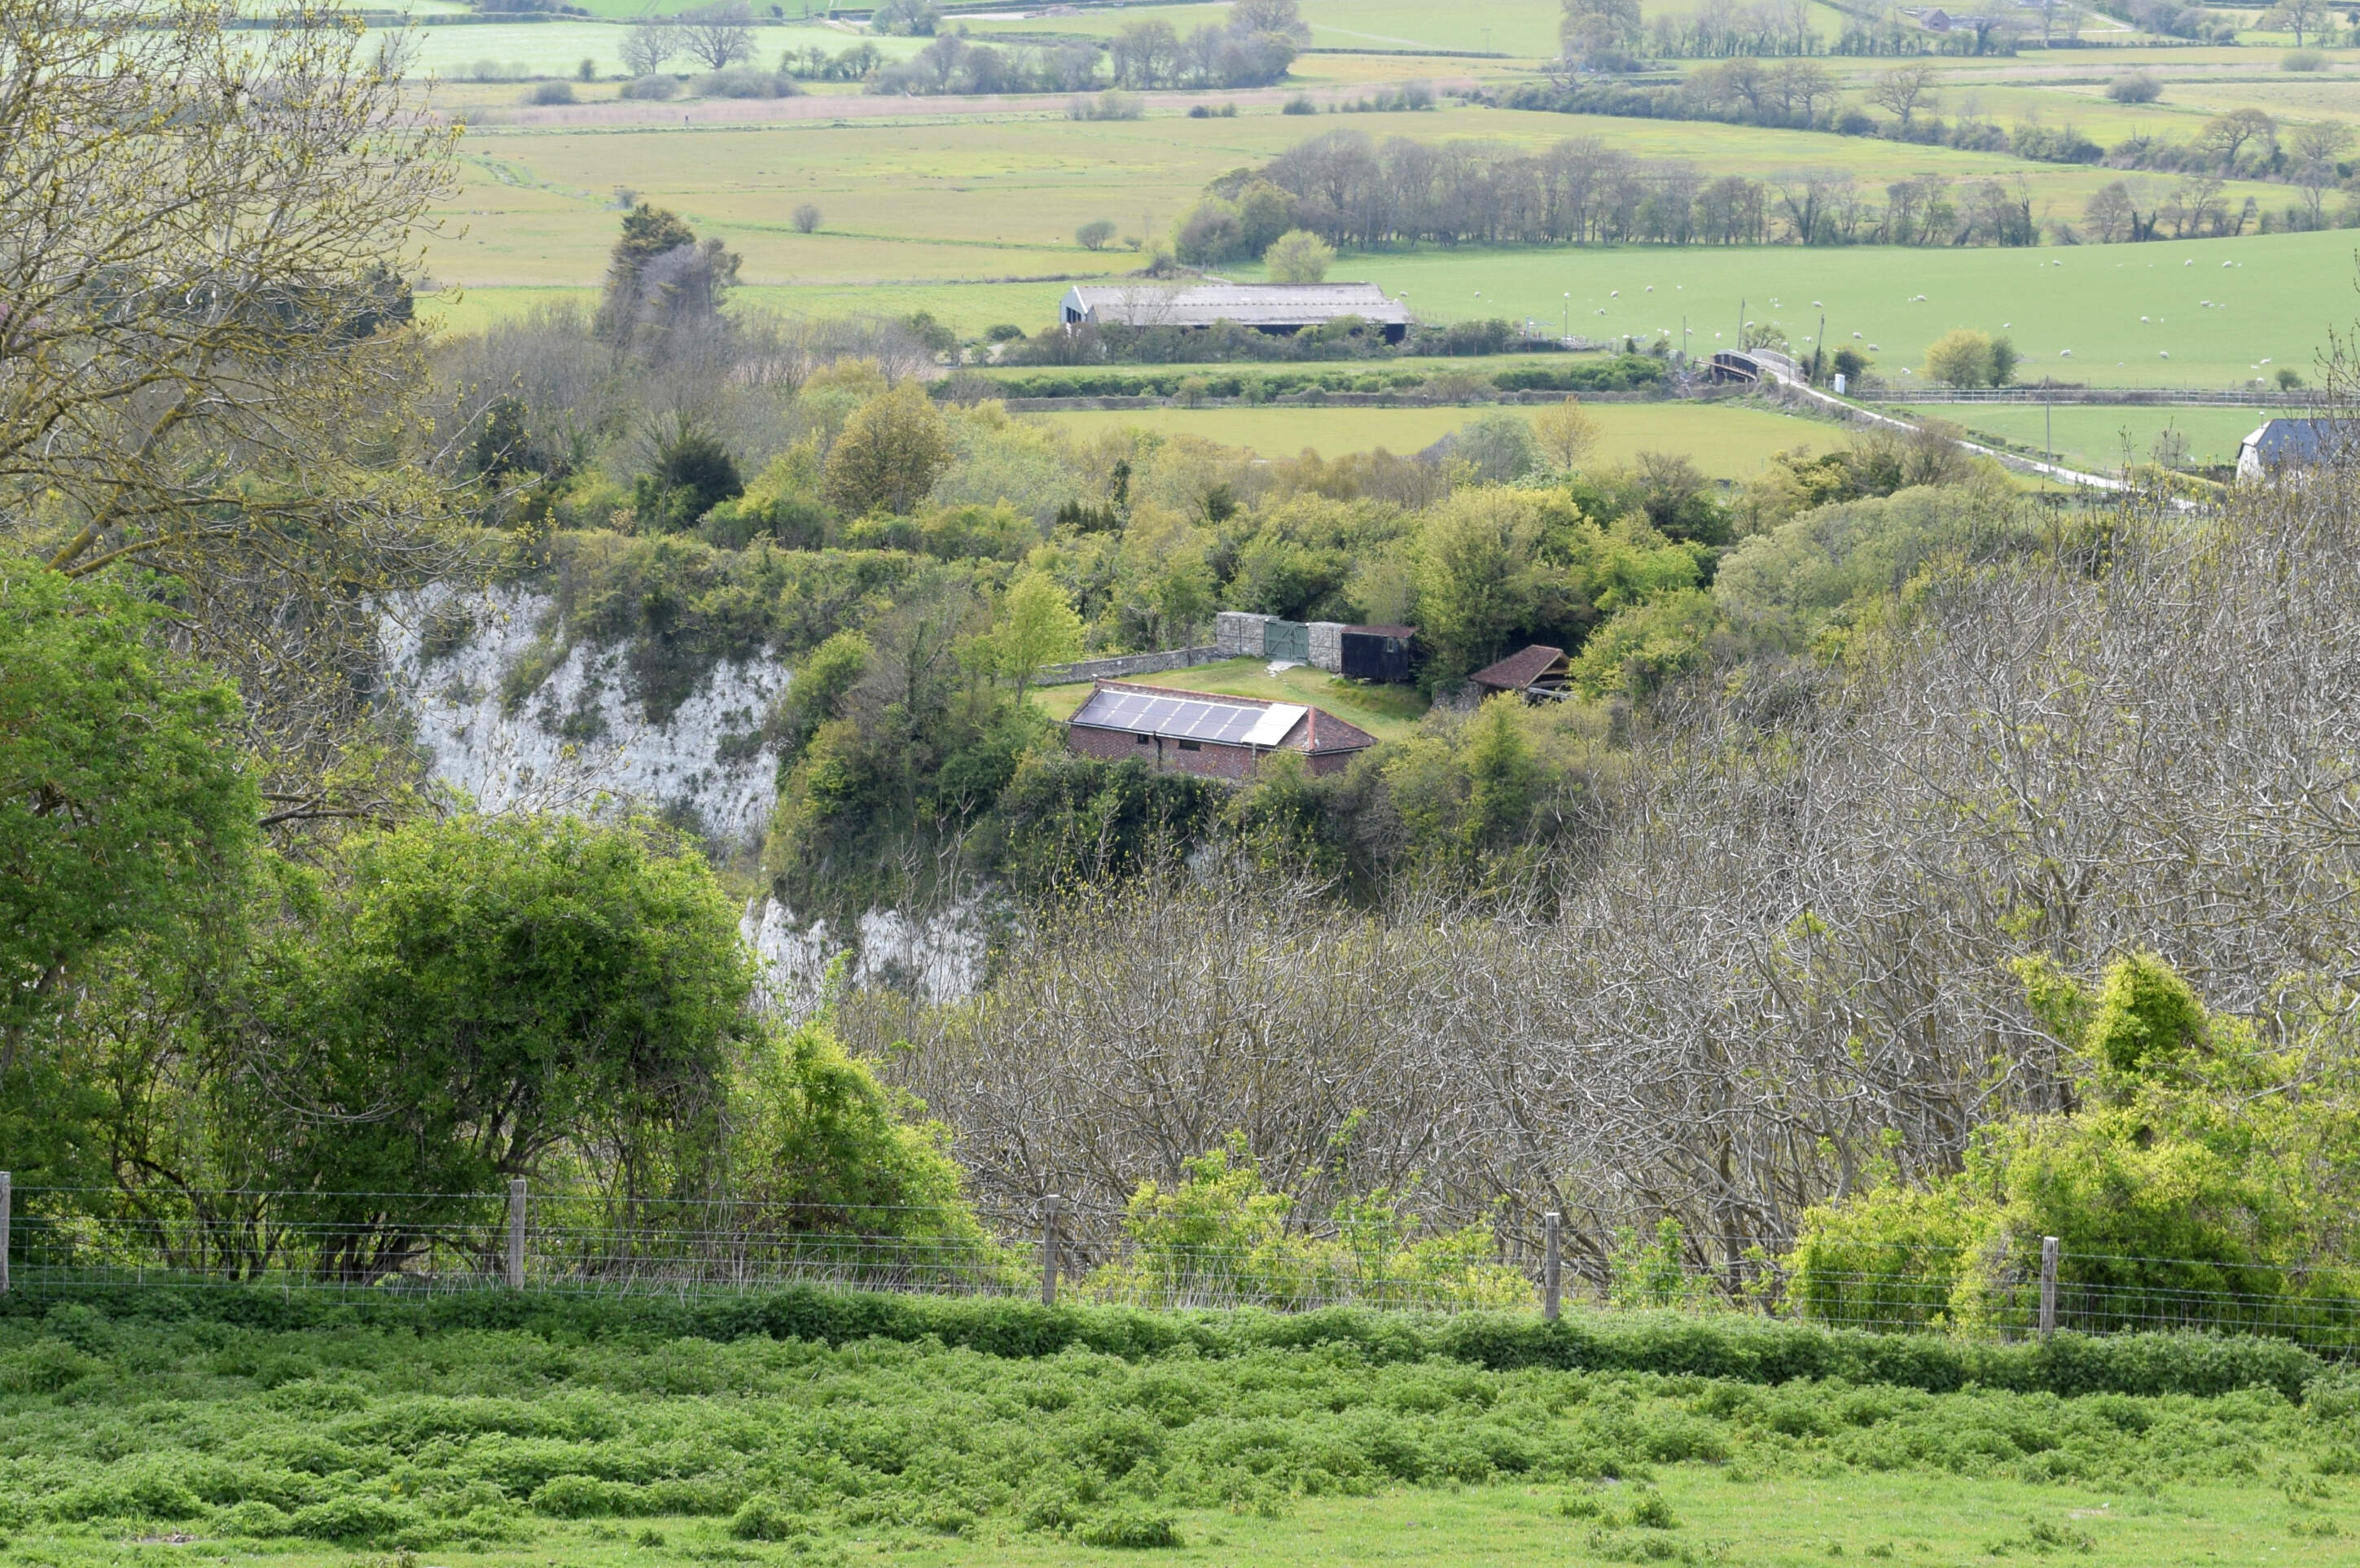 A view of Upper Barn showing it's rural and private location high above the Arun valley.